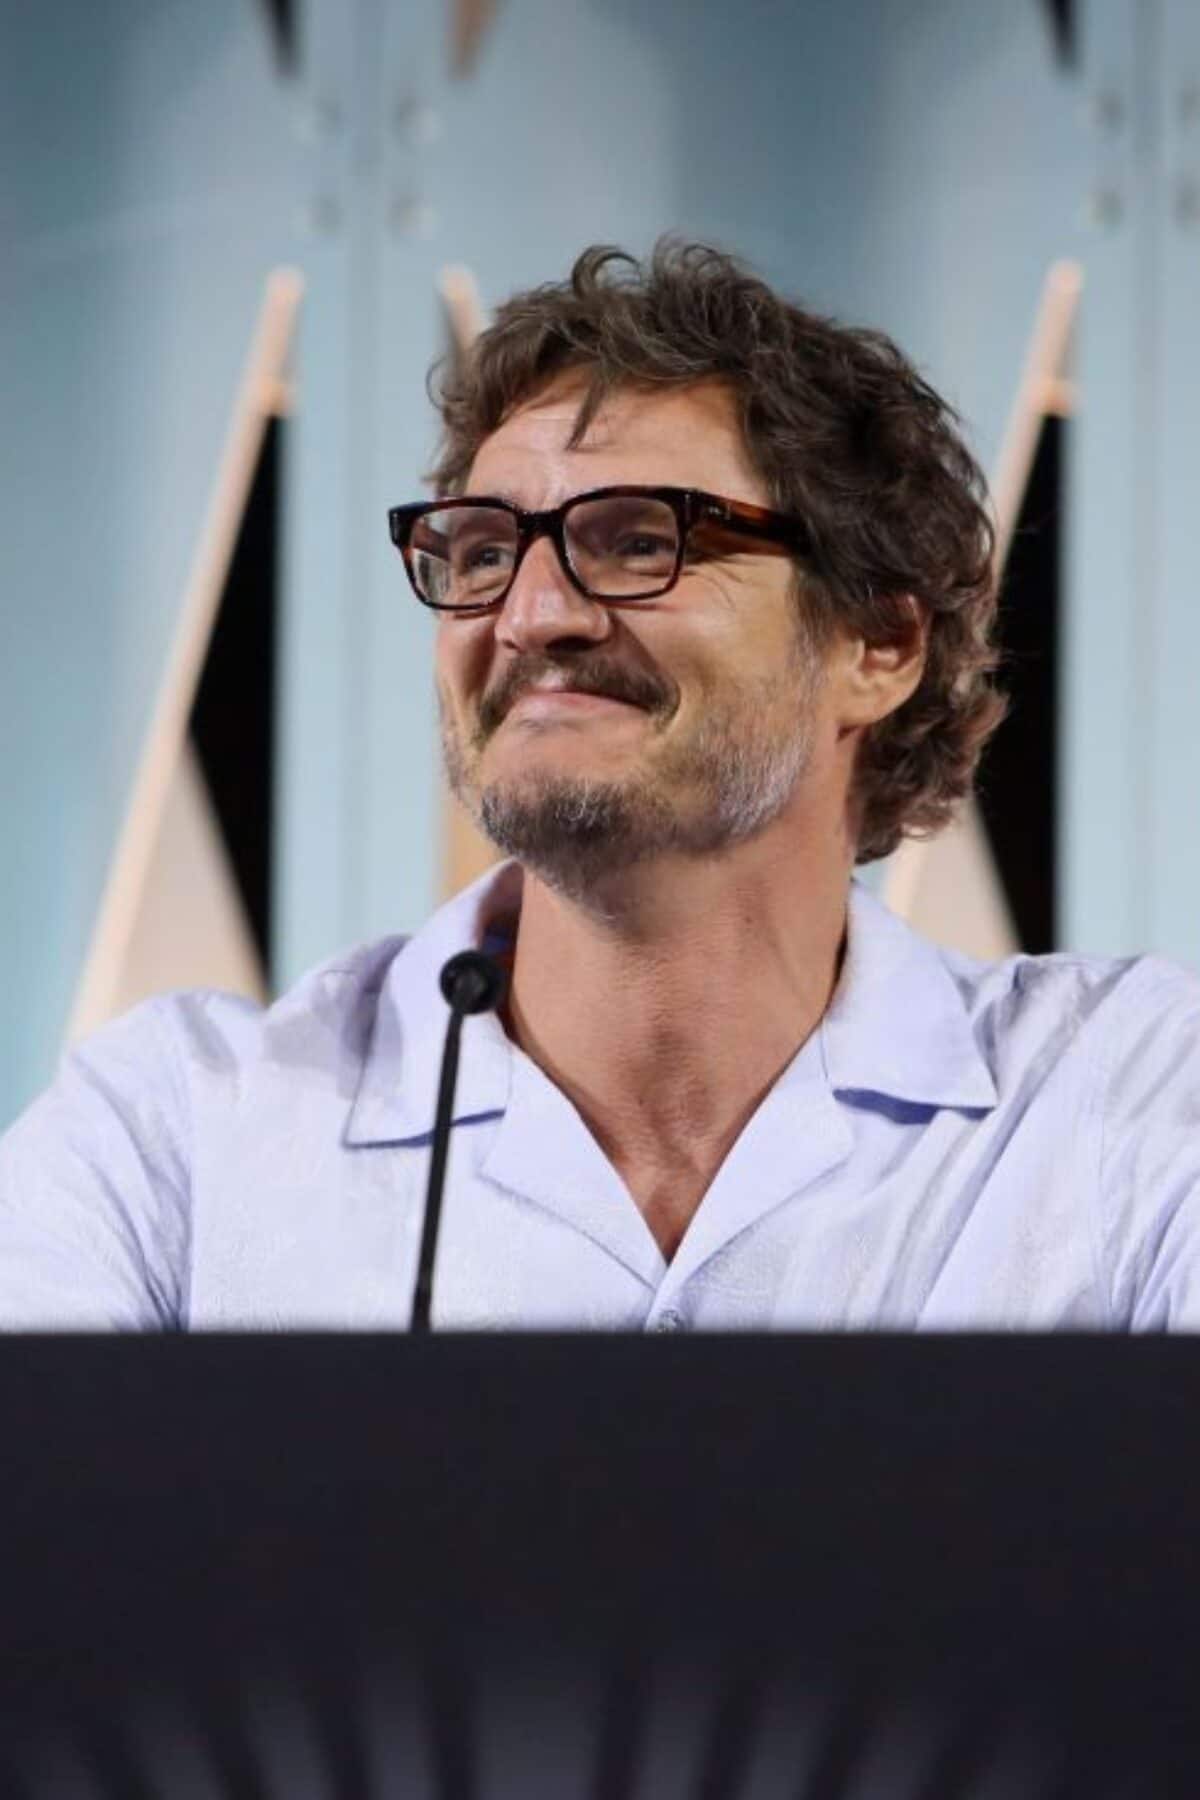 ANAHEIM, CALIFORNIA - MAY 28: Pedro Pascal attends the panel for “The Mandalorian” series at Star Wars Celebration in Anaheim, California on May 28, 2022. (Photo by Jesse Grant/Getty Images for Disney)